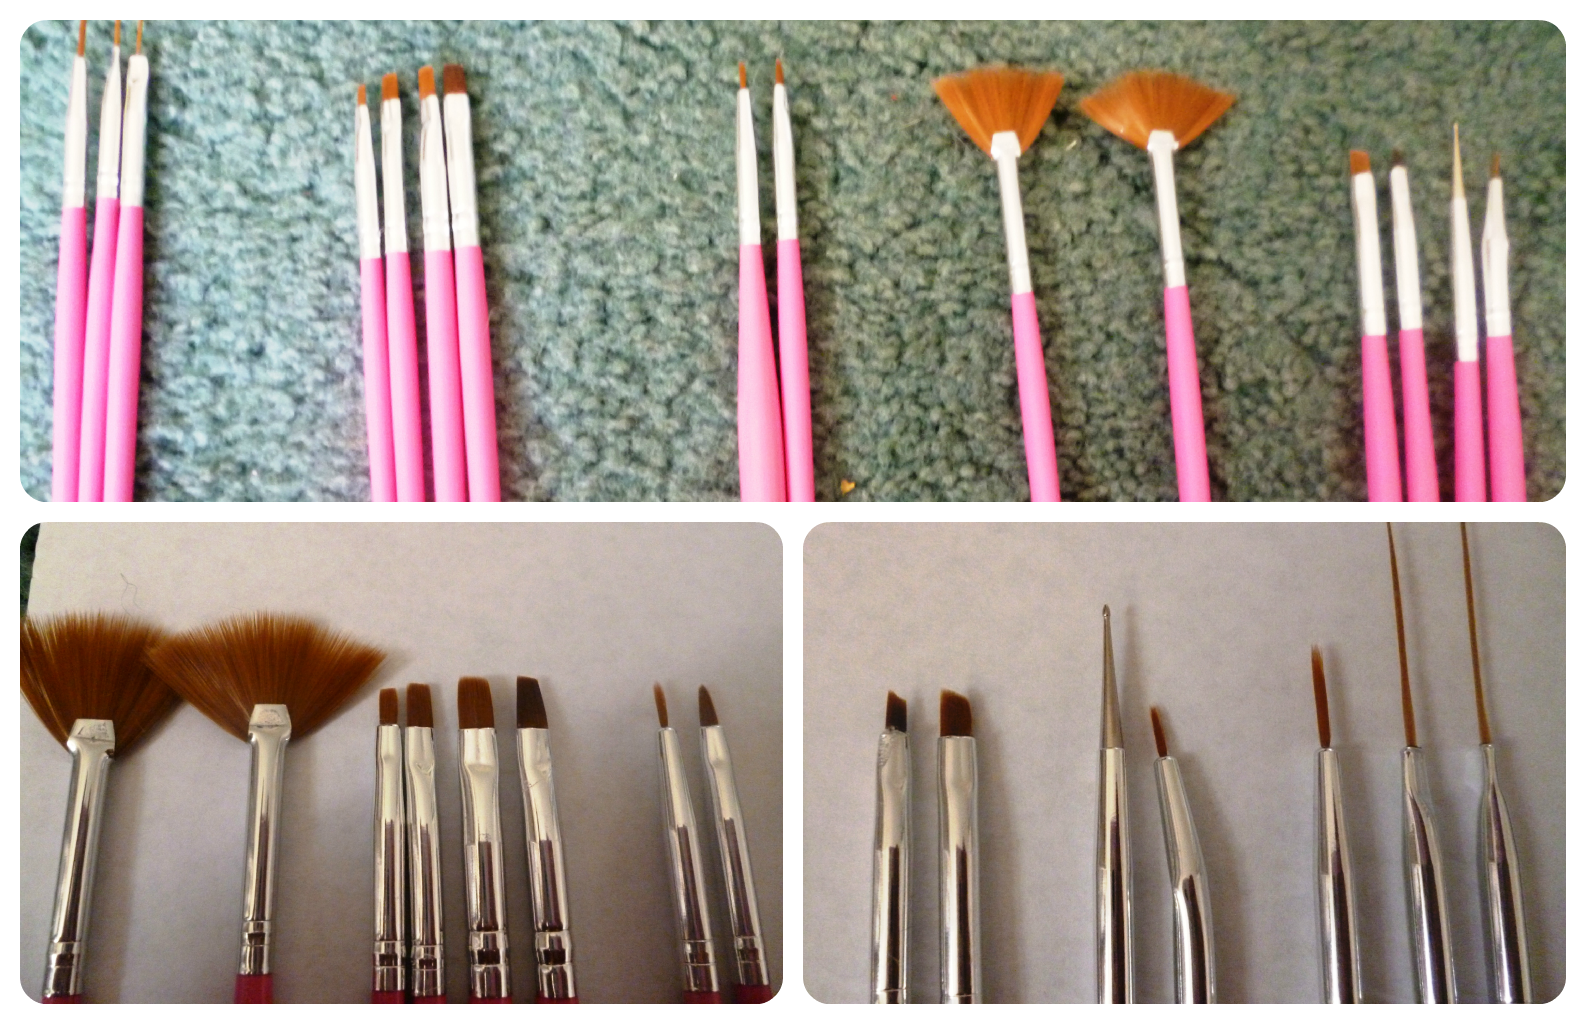 5. Nail Art Brushes - wide 1